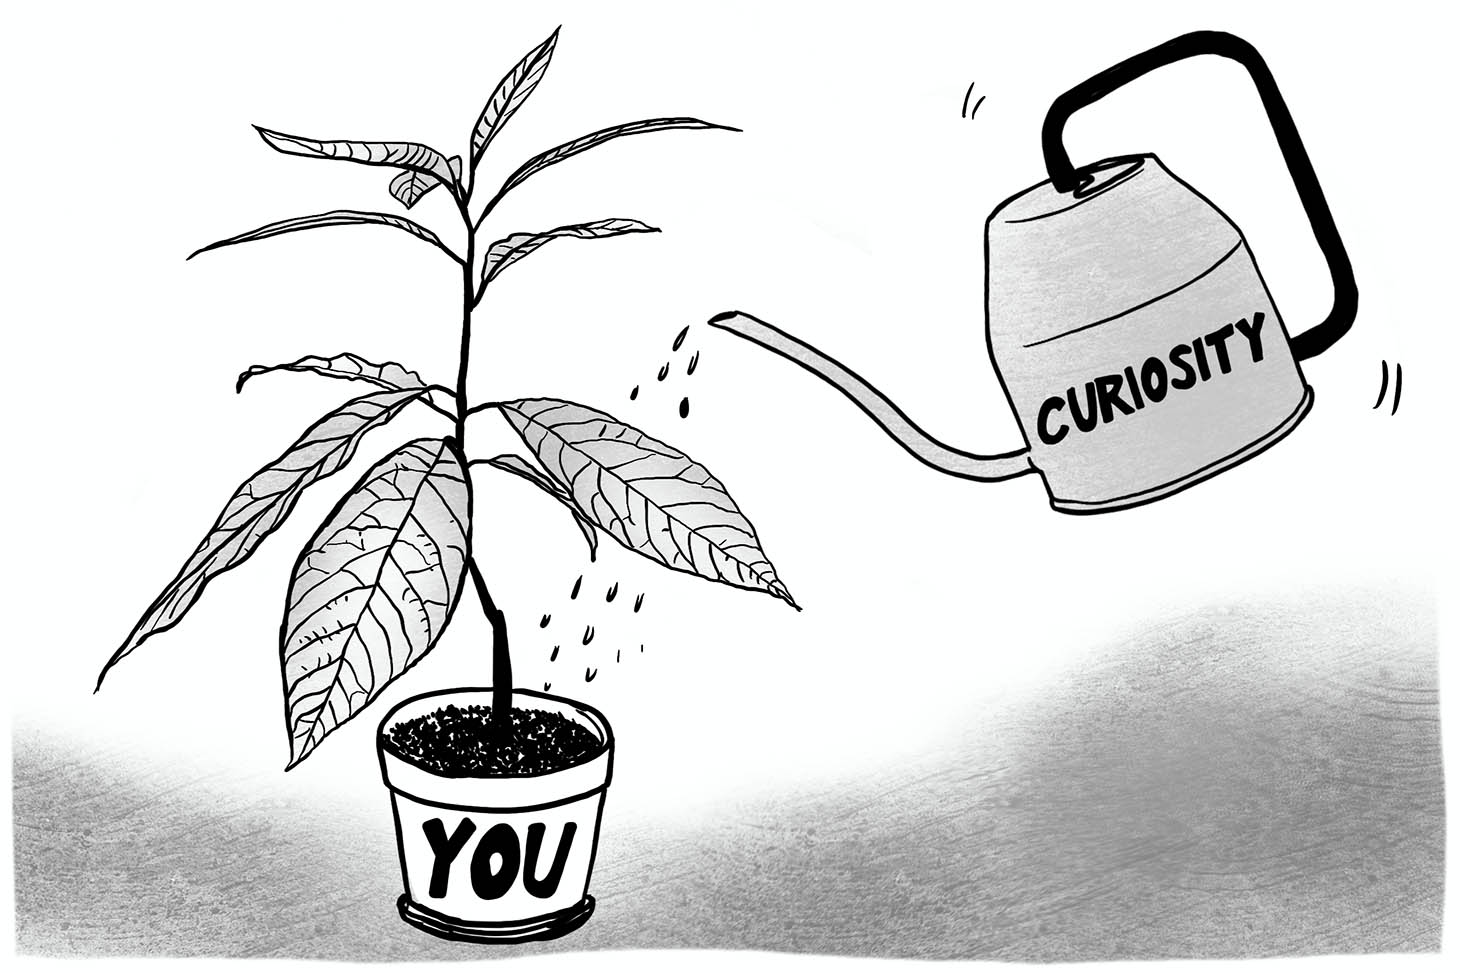 A plant being watered with curiosity so that it grows